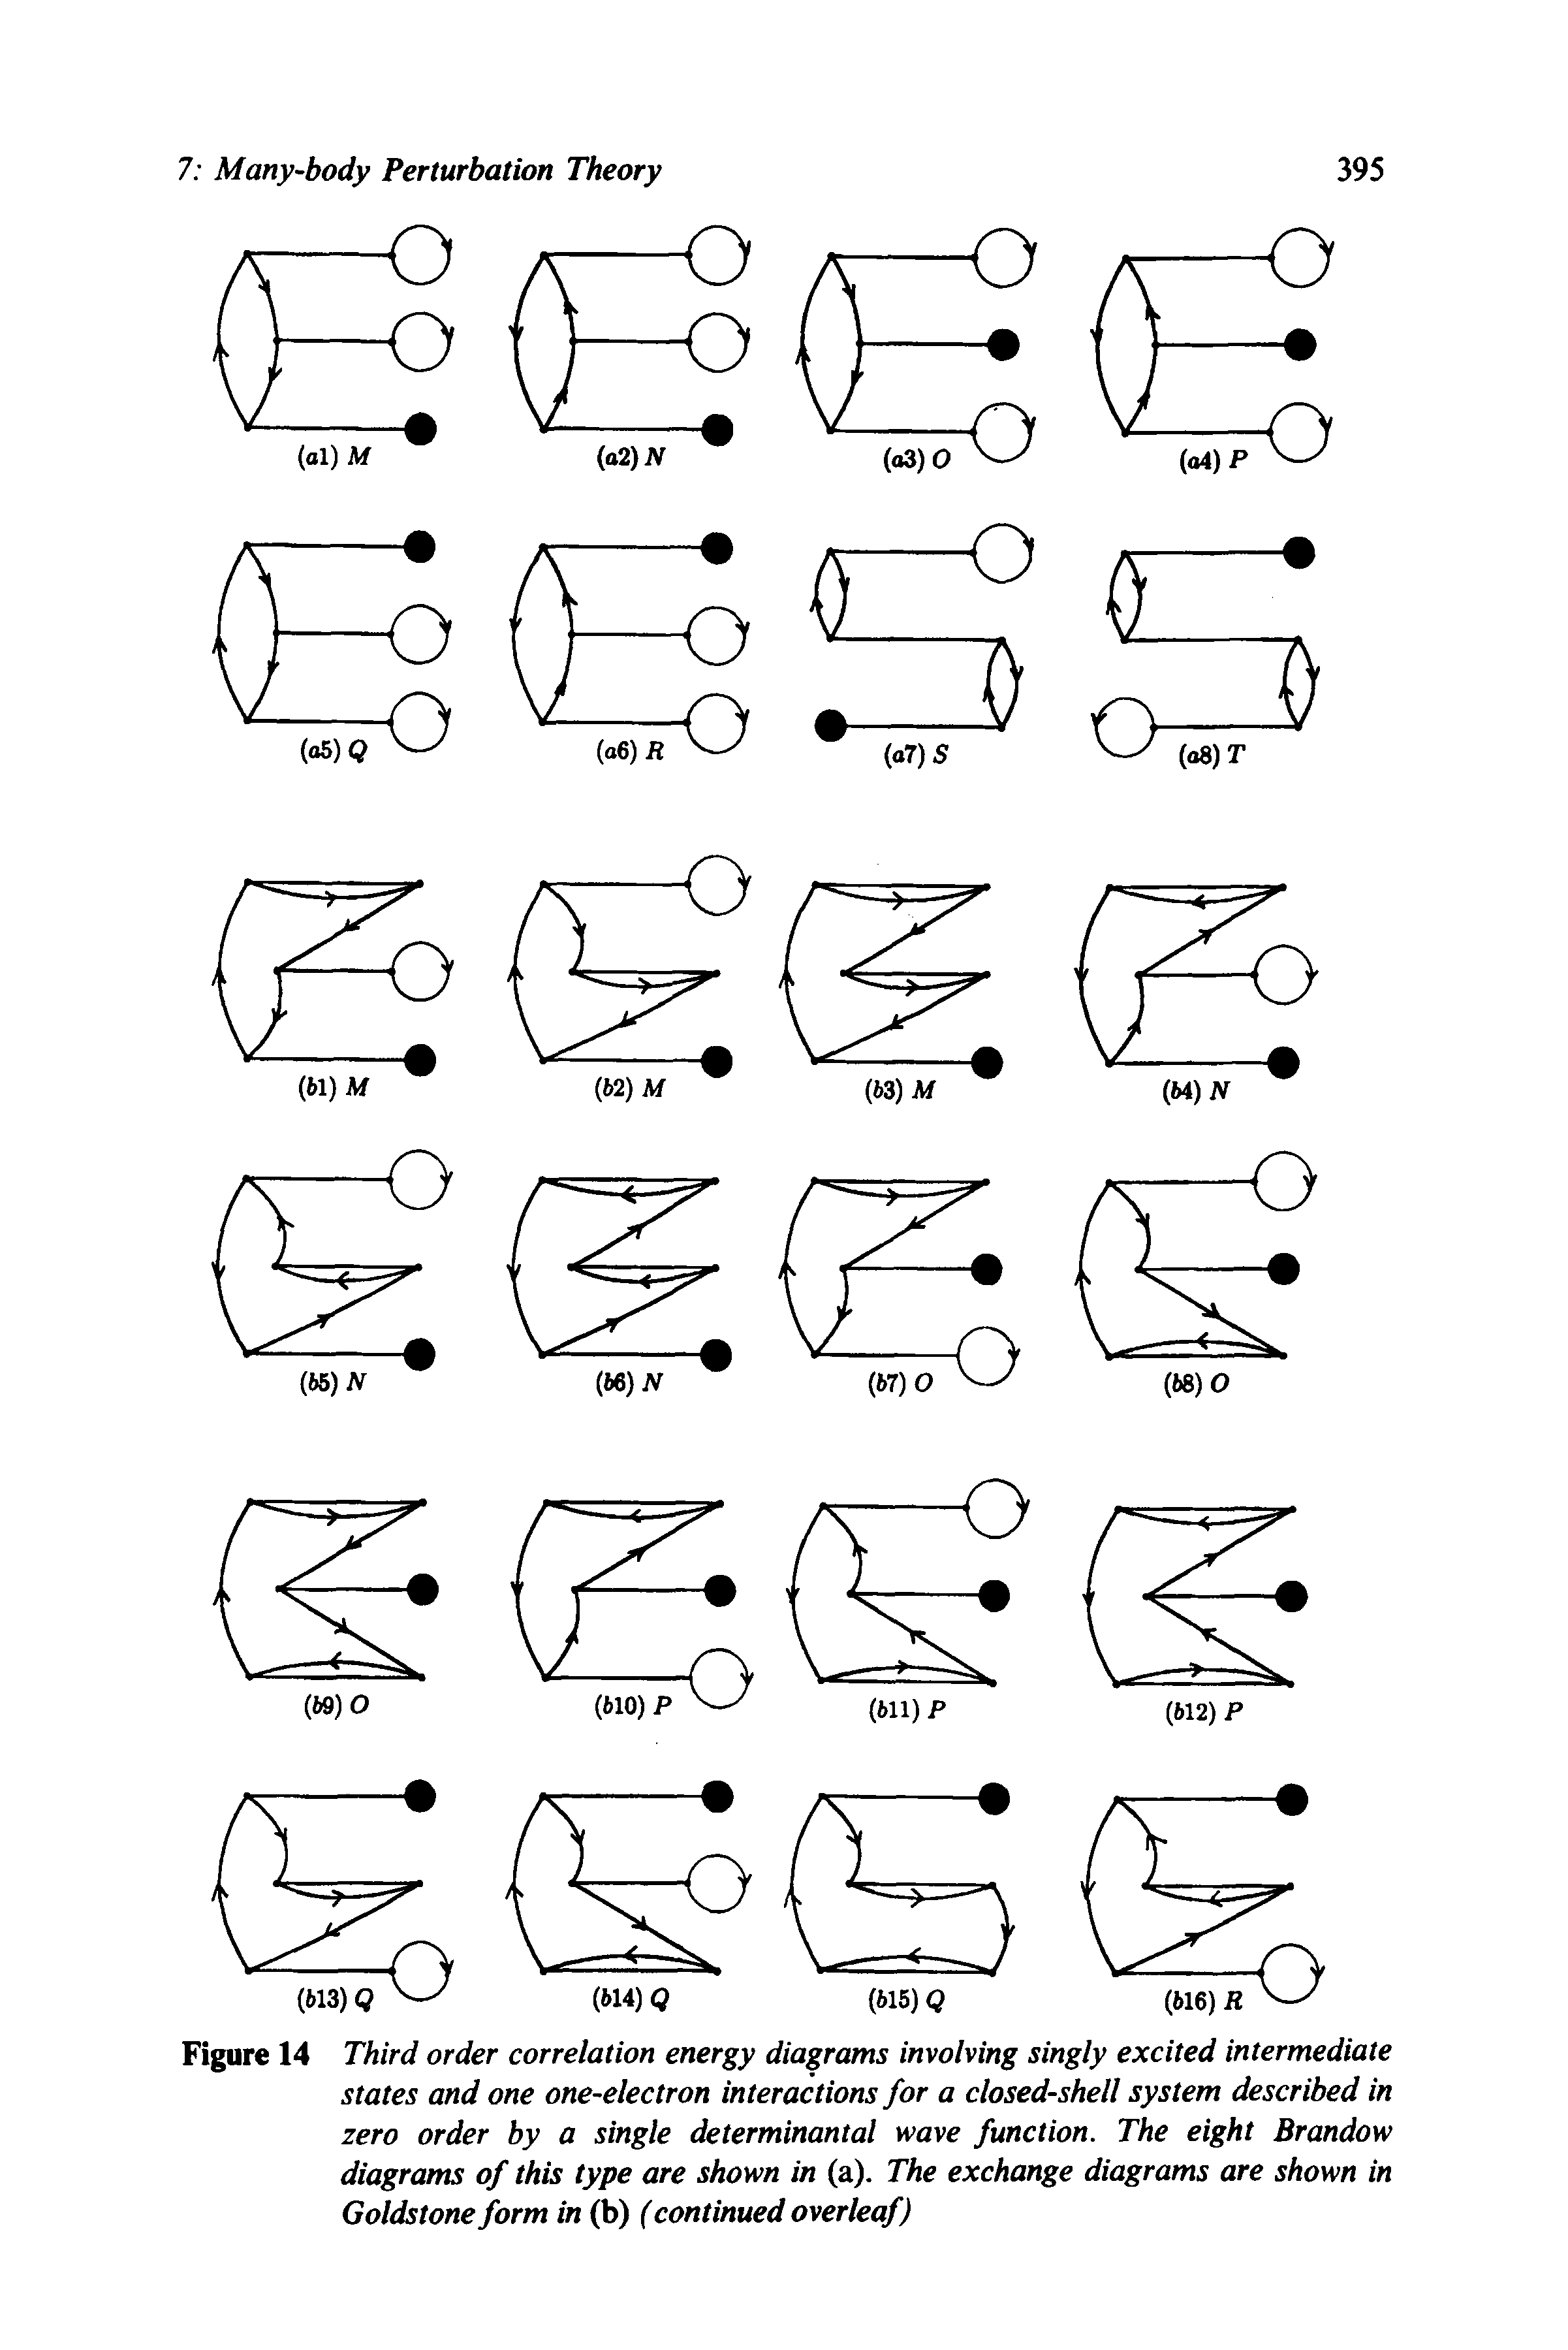 Figure 14 Third order correlation energy diagrams involving singly excited intermediate states and one one-electron interactions for a closed-shell system described in zero order by a single determinantal wave function. The eight Brandow diagrams of this type are shown in (a). The exchange diagrams are shown in Goldstone form in (b) (continued overleaf)...